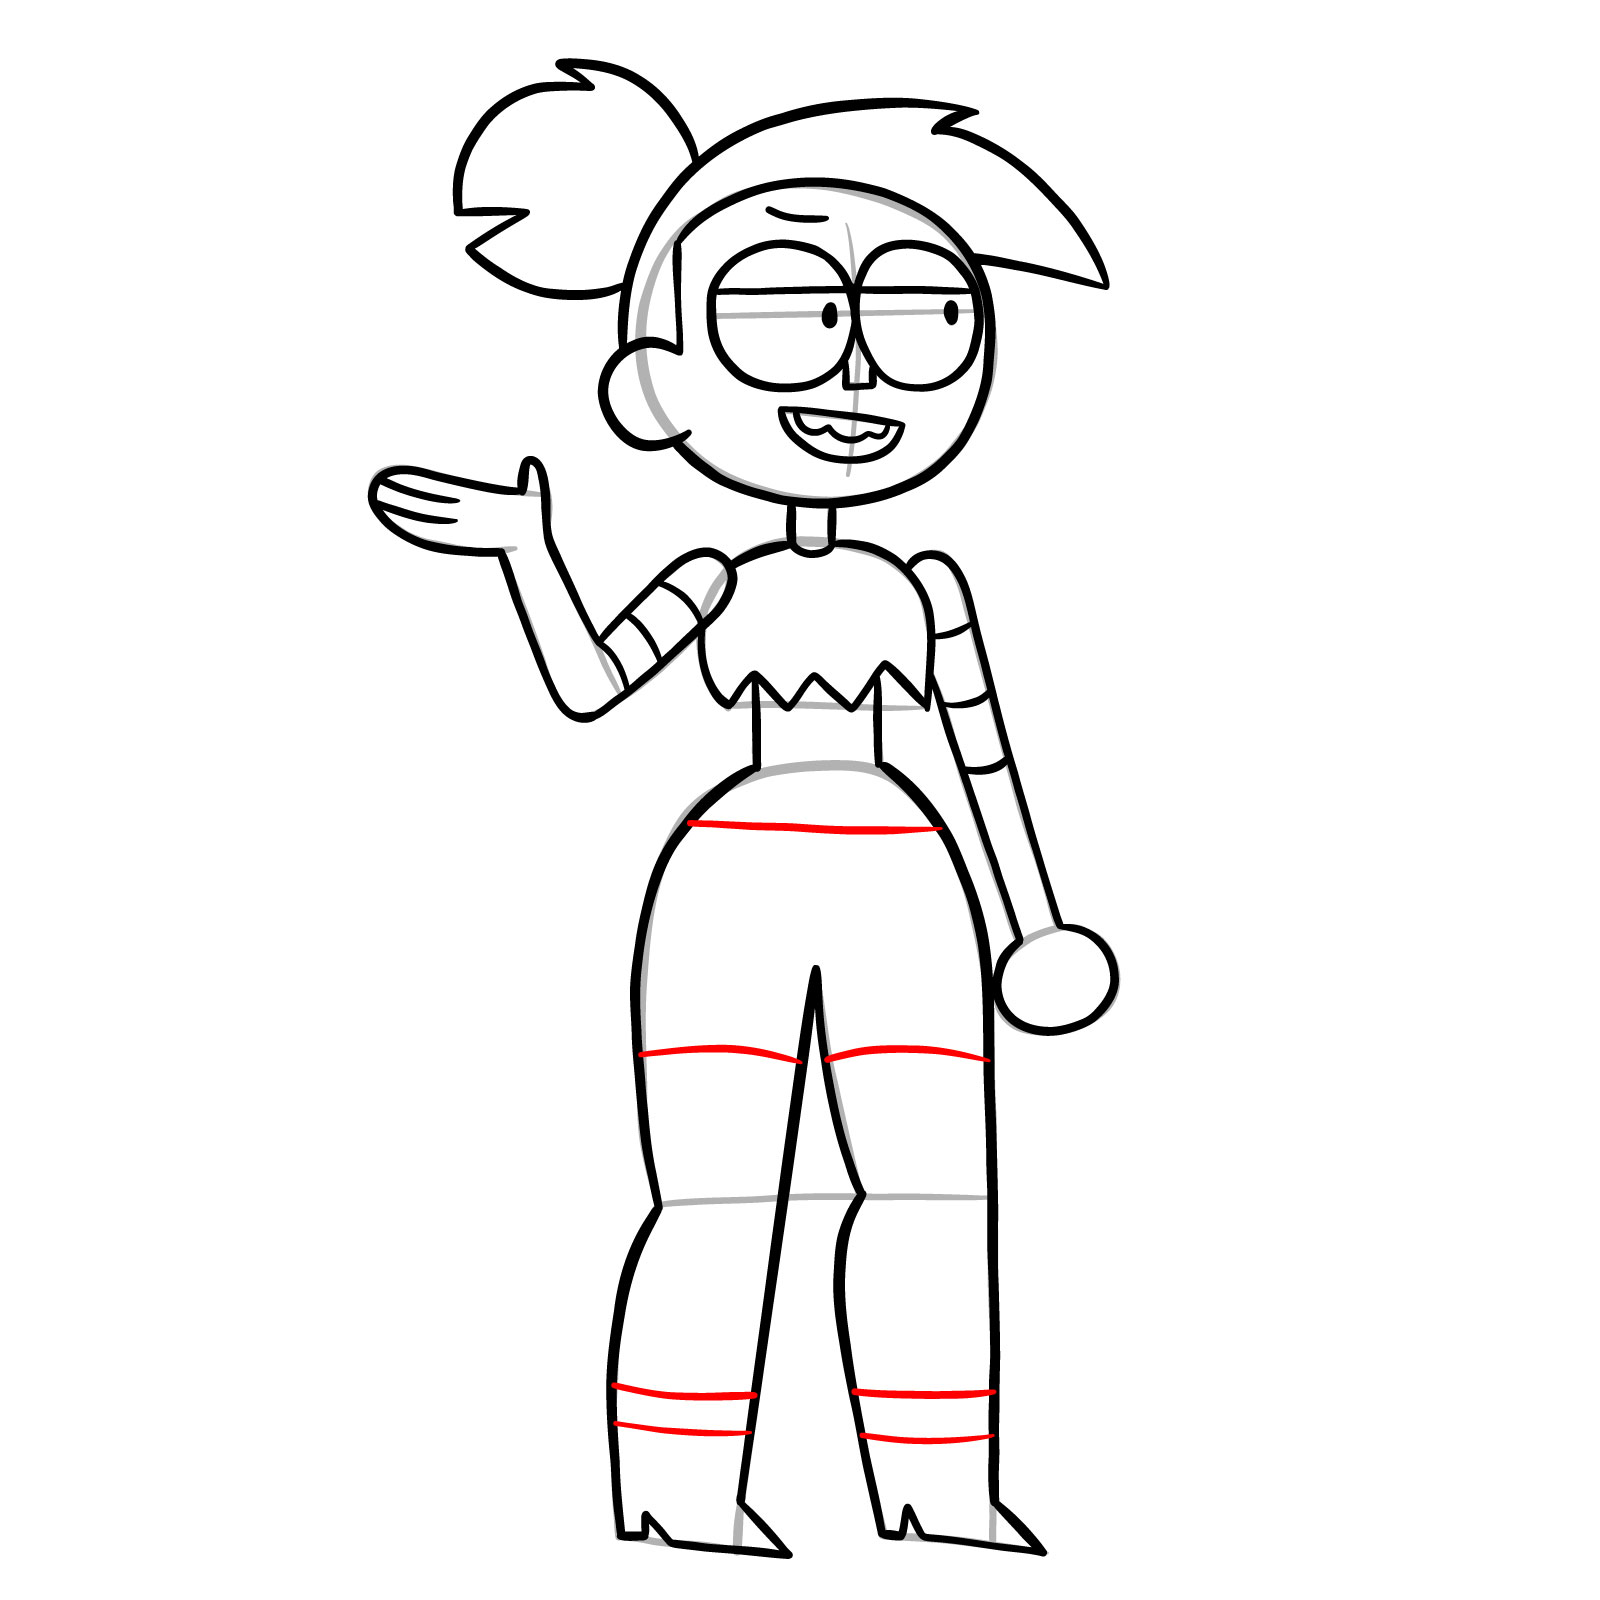 How to draw Enid Mettle from OK K.O.! - step 23